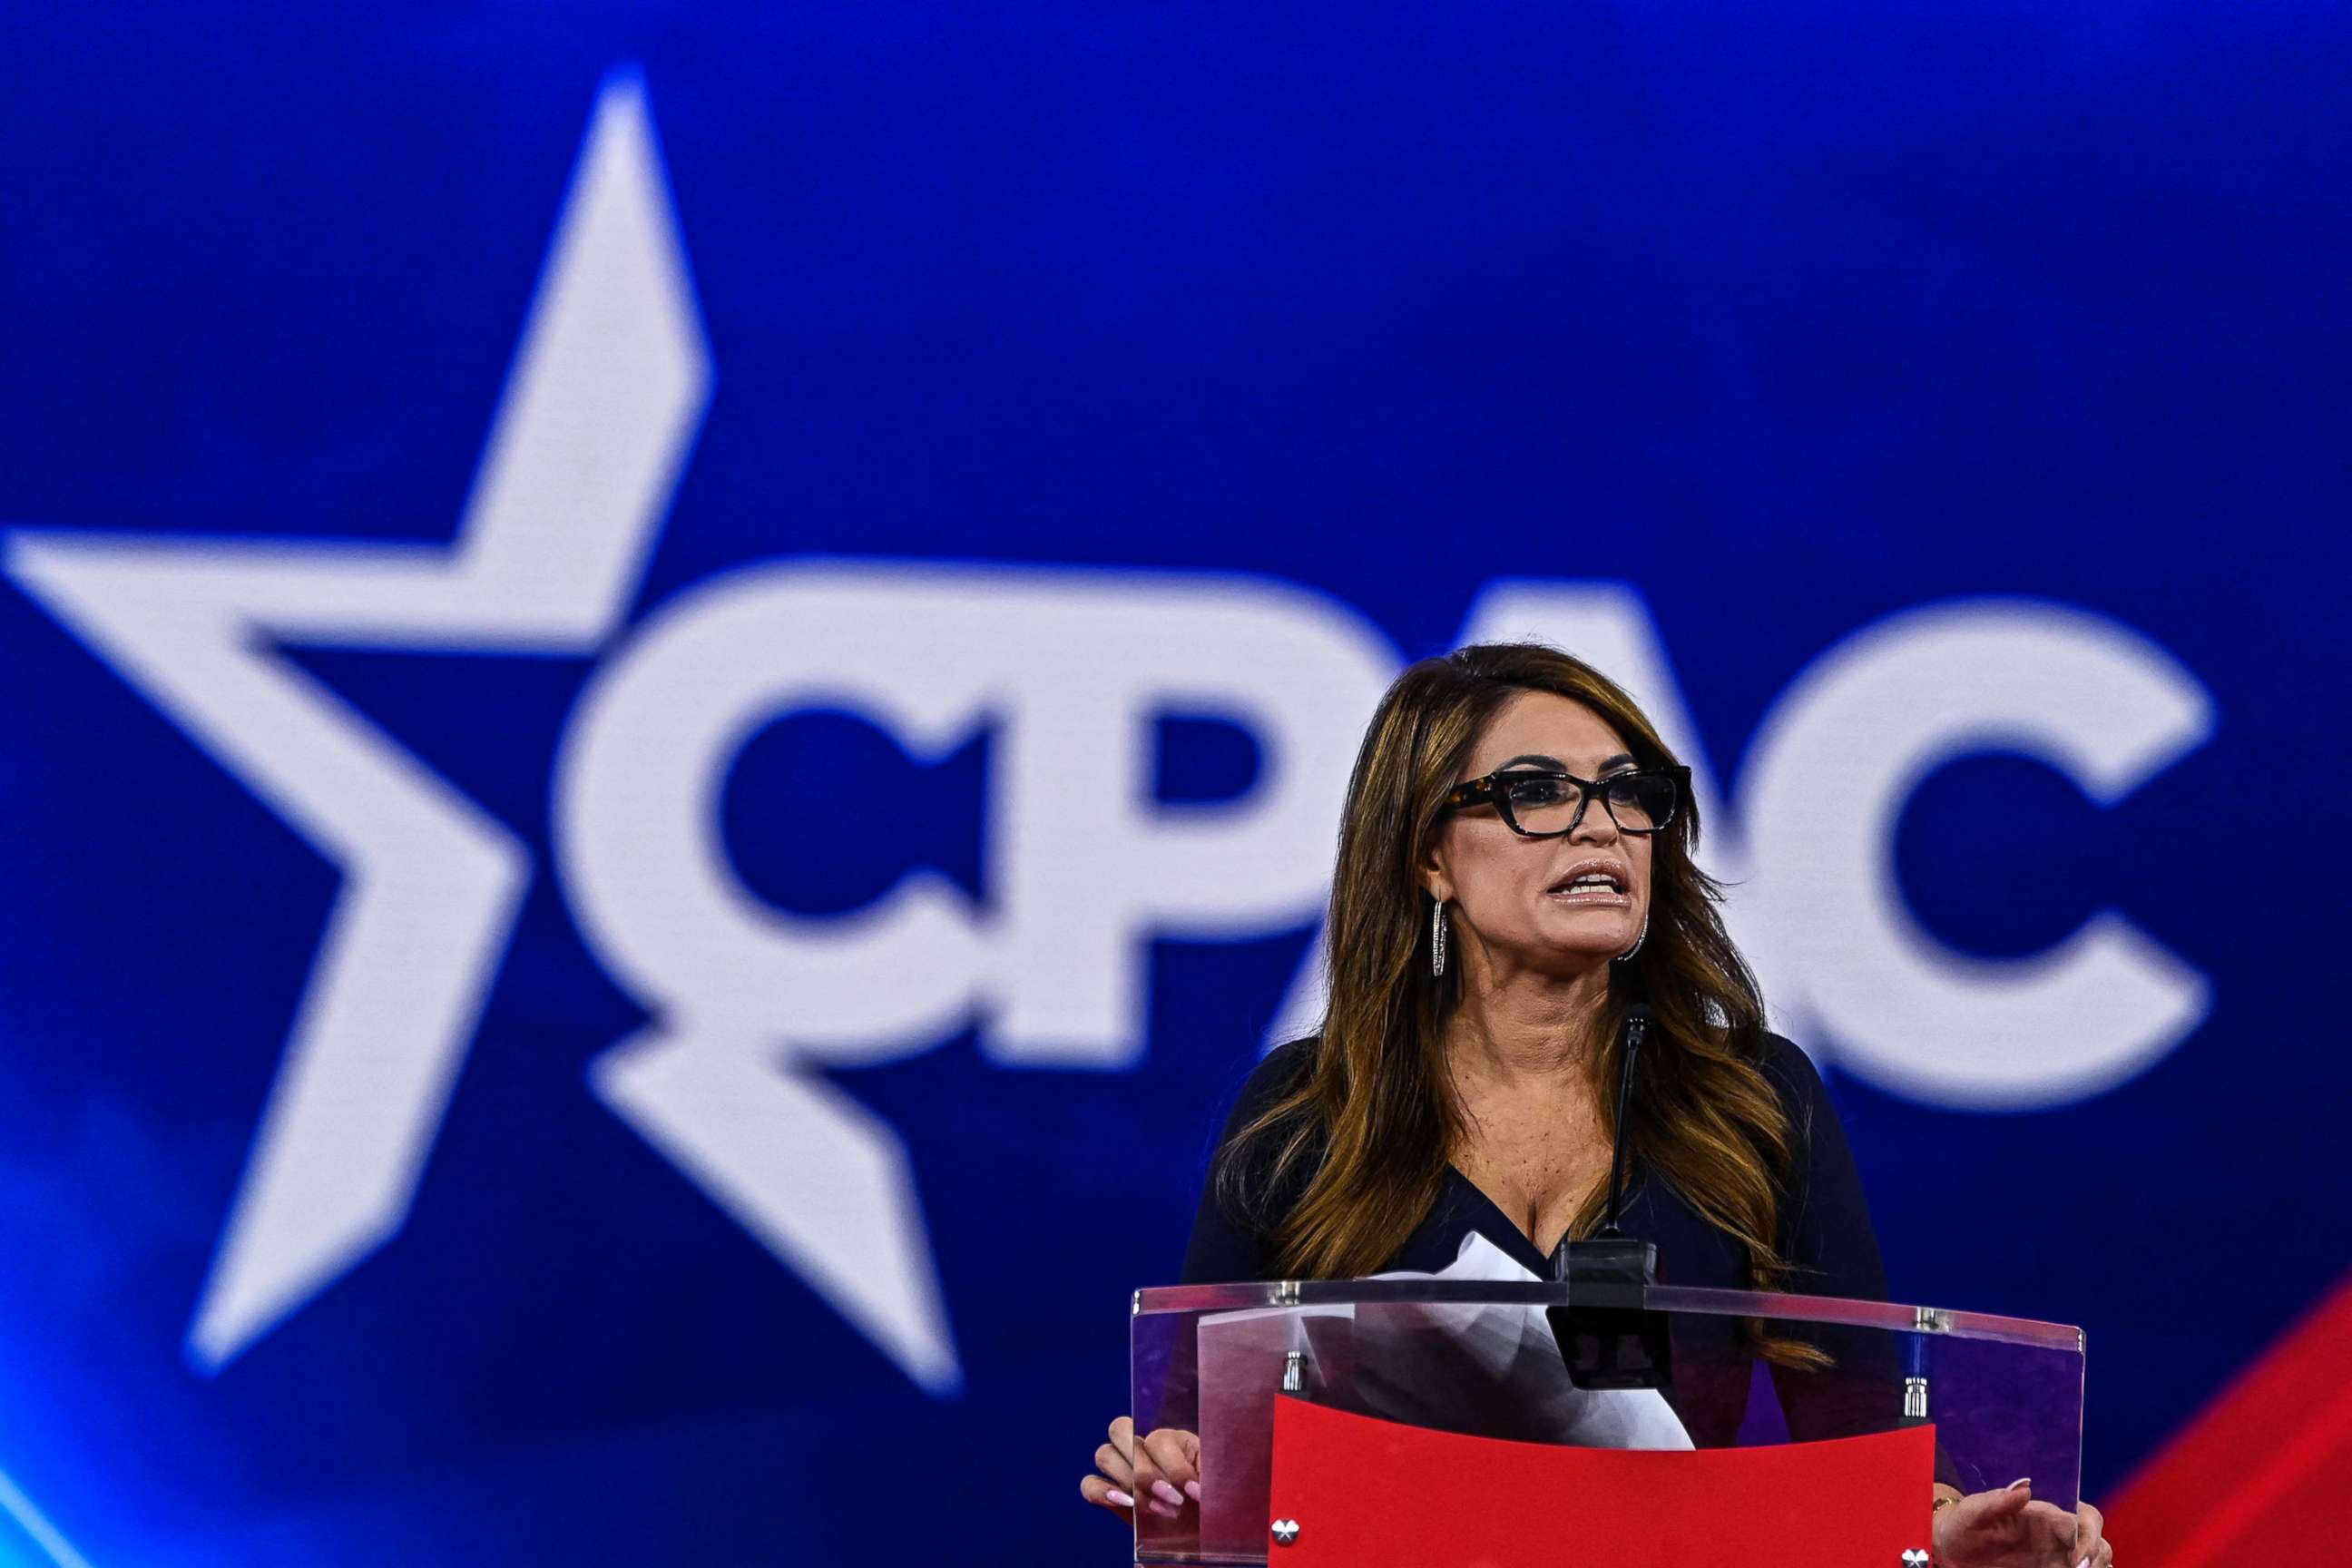 PHOTO: Kimberly Guilfoyle speaks at the Conservative Political Action Conference 2022 (CPAC) in Orlando, Fla., Feb. 24, 2022.